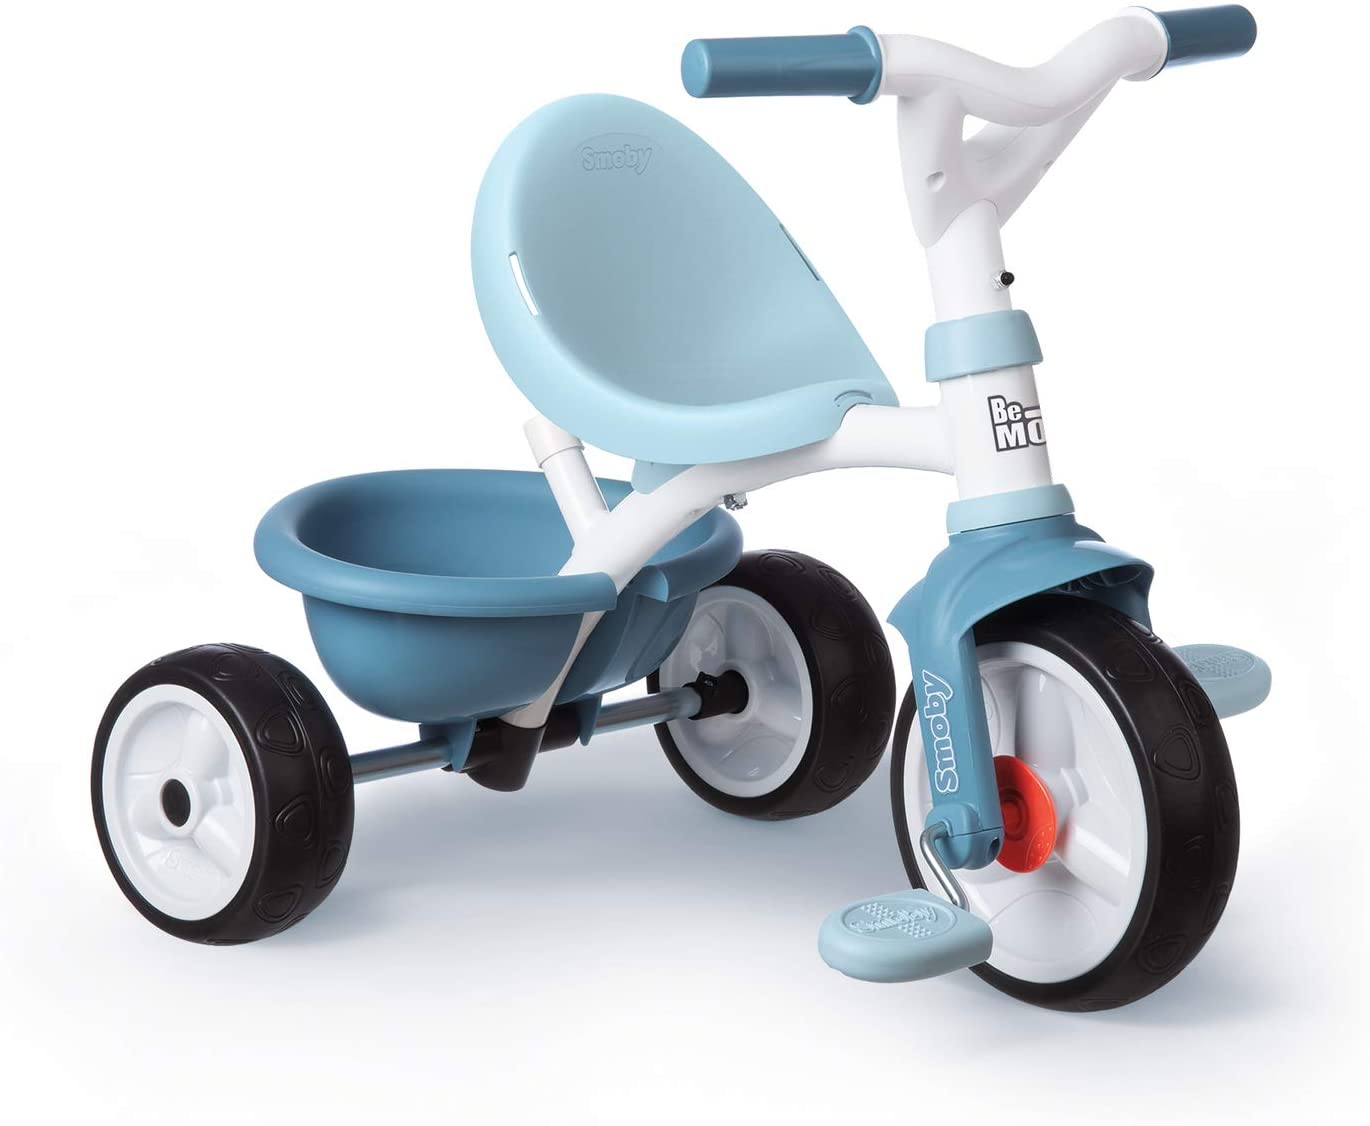 TRICICLO BE MOVE COMFORT AZUL 740414